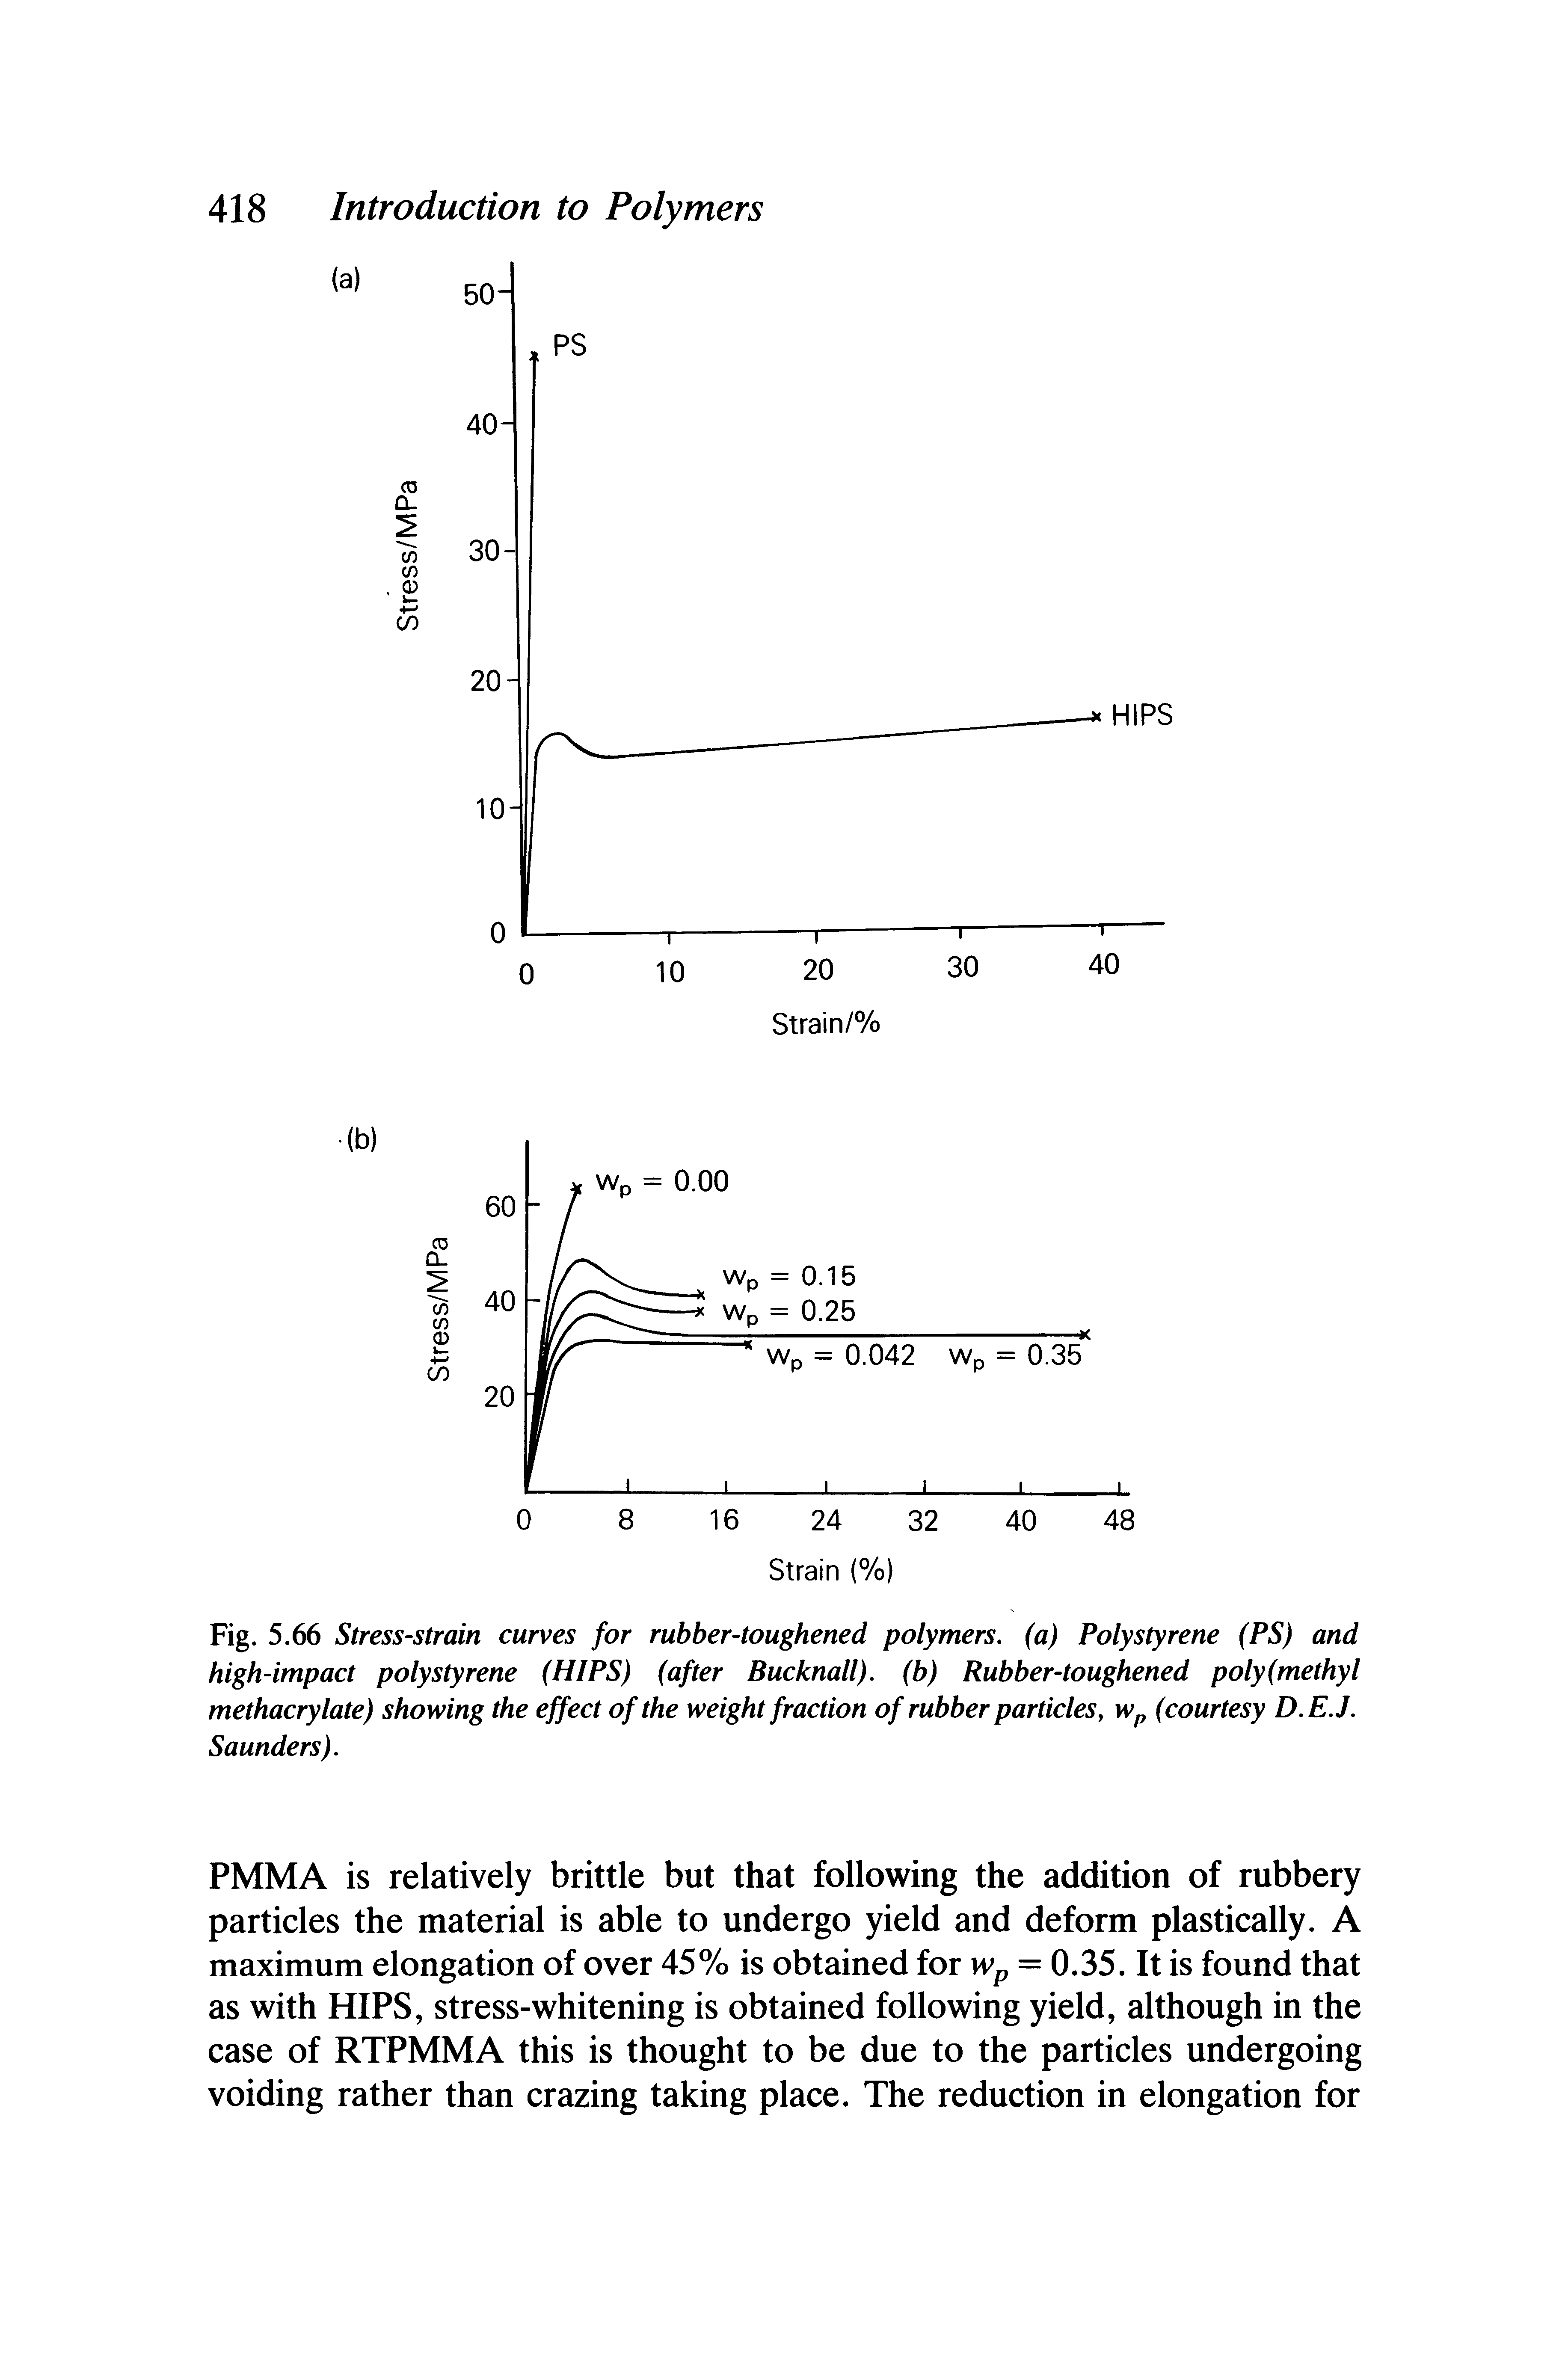 Fig. 5.66 Stress-strain curves for rubber-toughened polymers, (a) Polystyrene (PS) and high-impact polystyrene (HIPS) (after Bucknall). (b) Rubber-toughened poly(methyl methacrylate) showing the effect of the weight fraction of rubber particlesy Wp (courtesy D.E.J. Saunders).